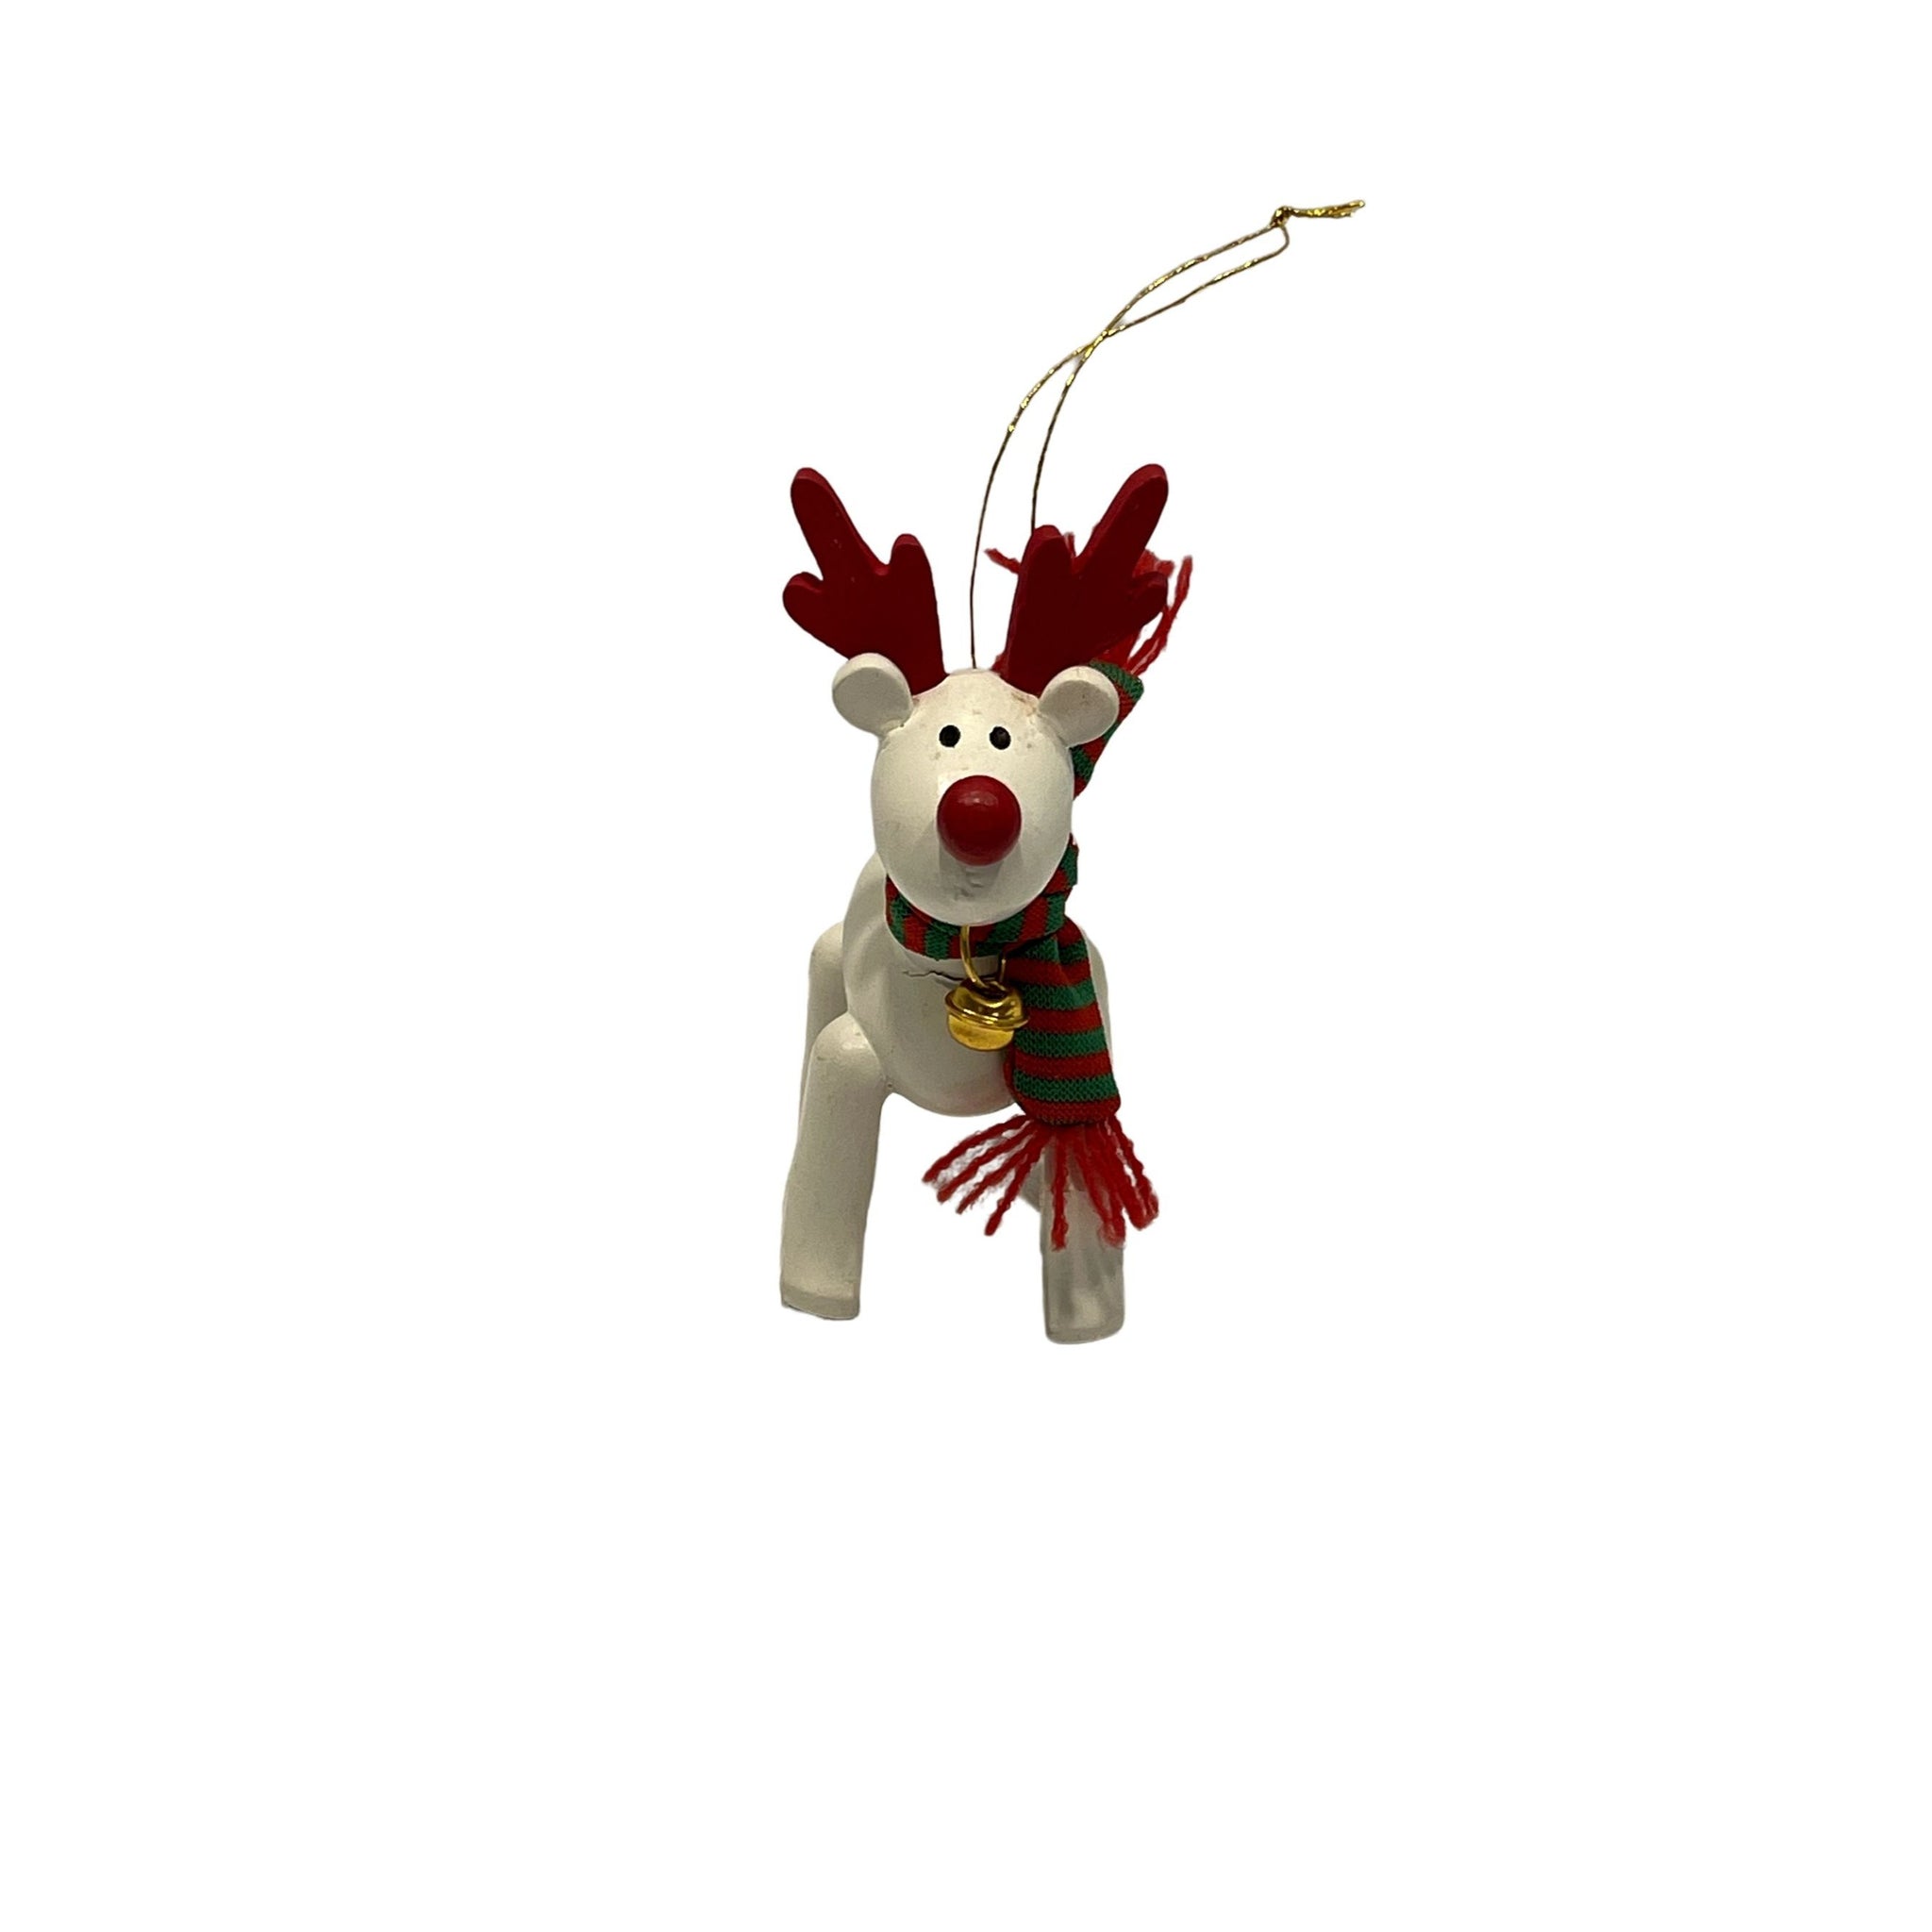 VINTAGE 1987 AVON Collectible Christmas Ornament Wood Reindeer -Great Condition